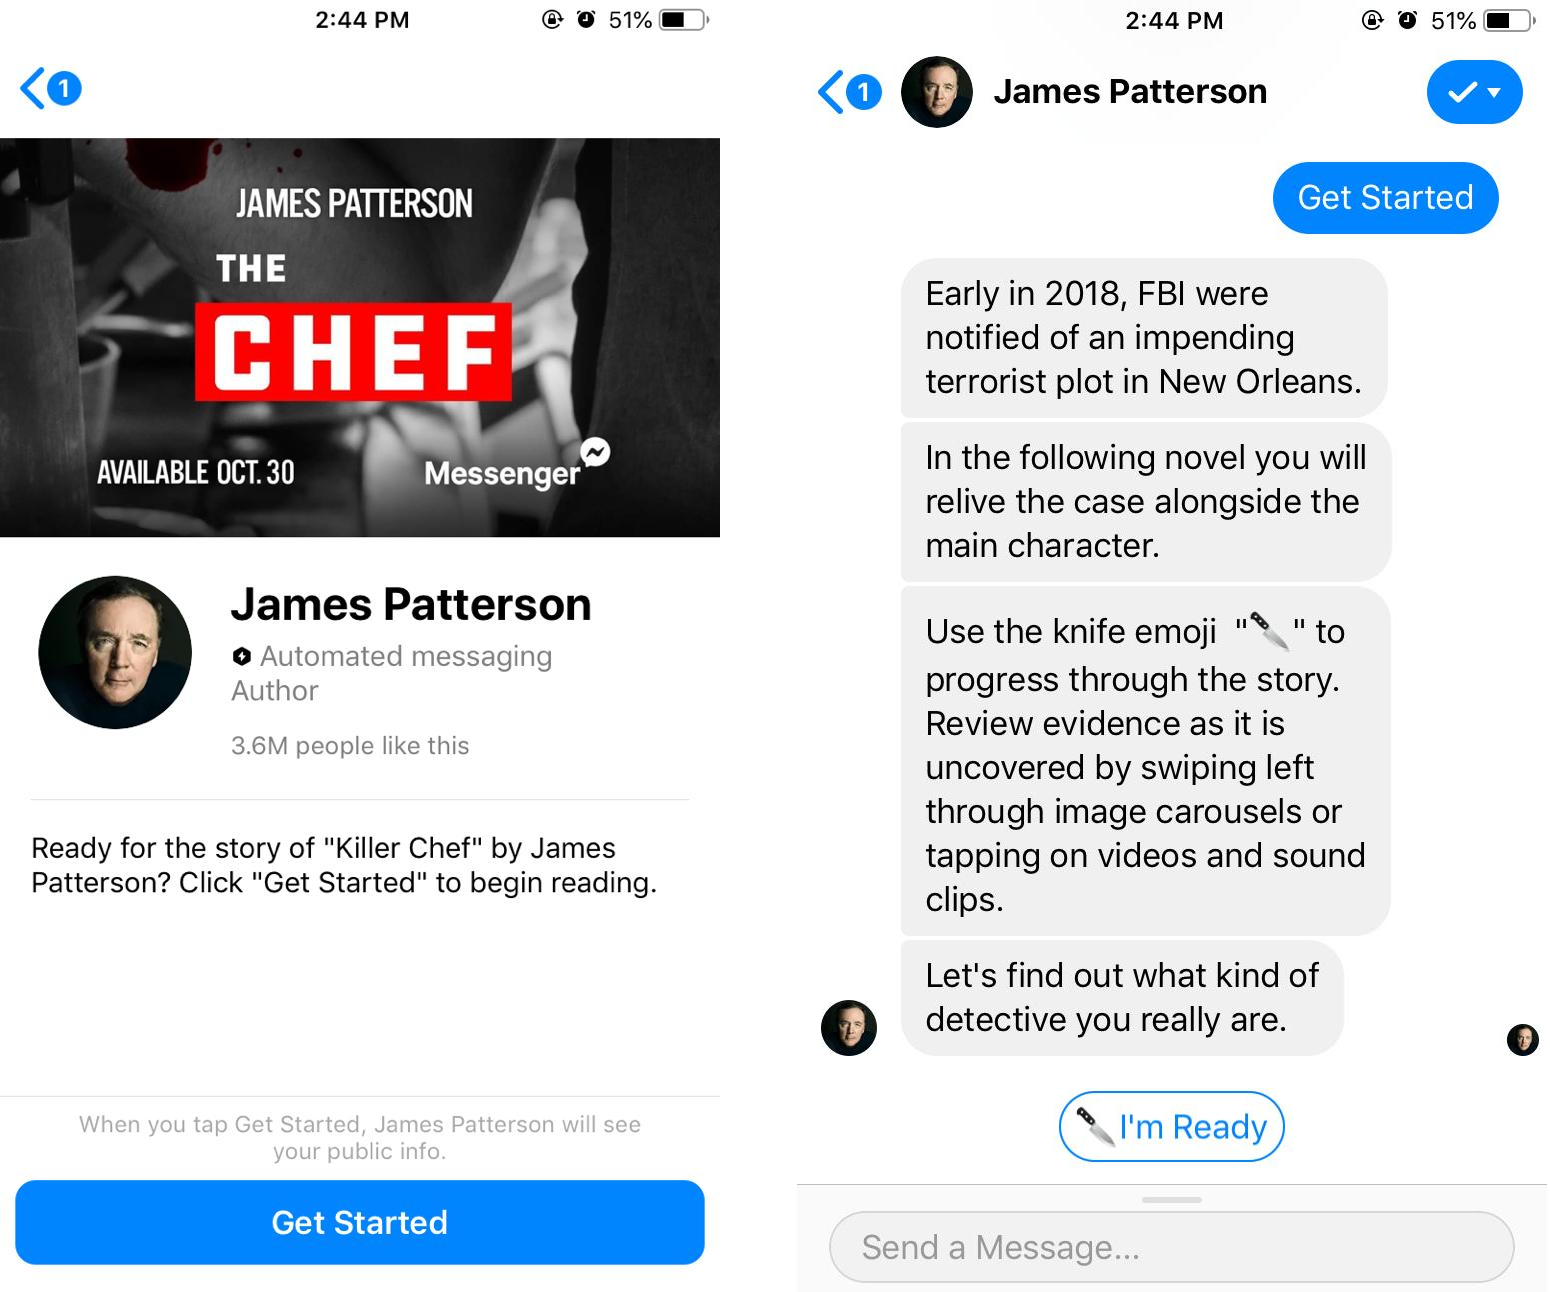 The Chef by James Patterson on Facebook Messenger